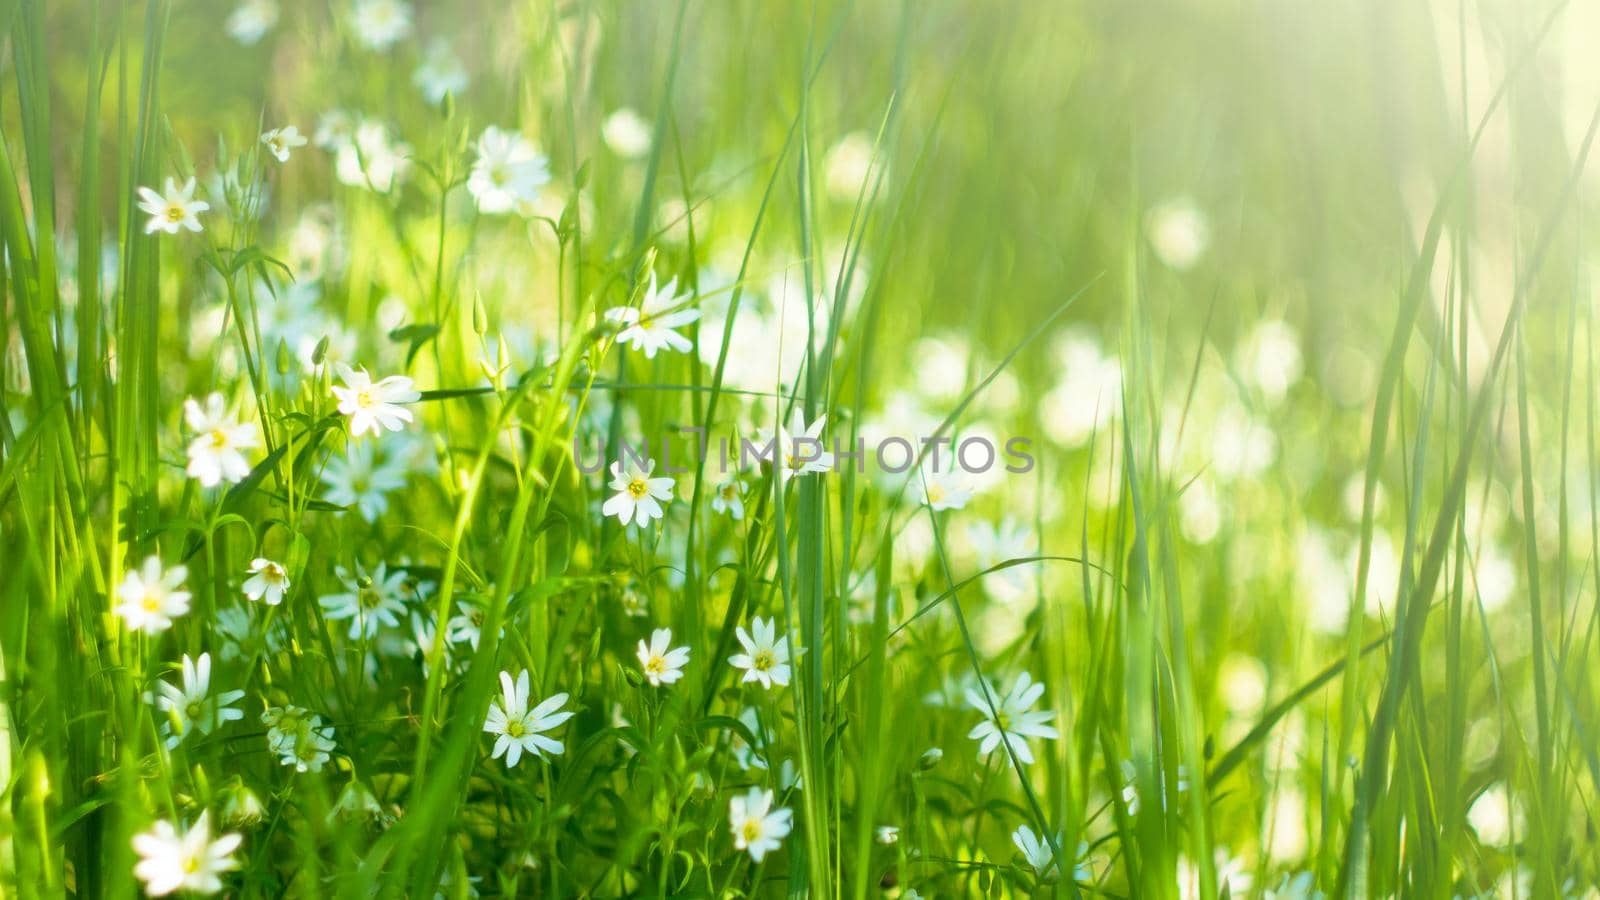 Meadow with meadow grasses and delicate white little flowers in the sunlight on a summer day. Soft focus, filters